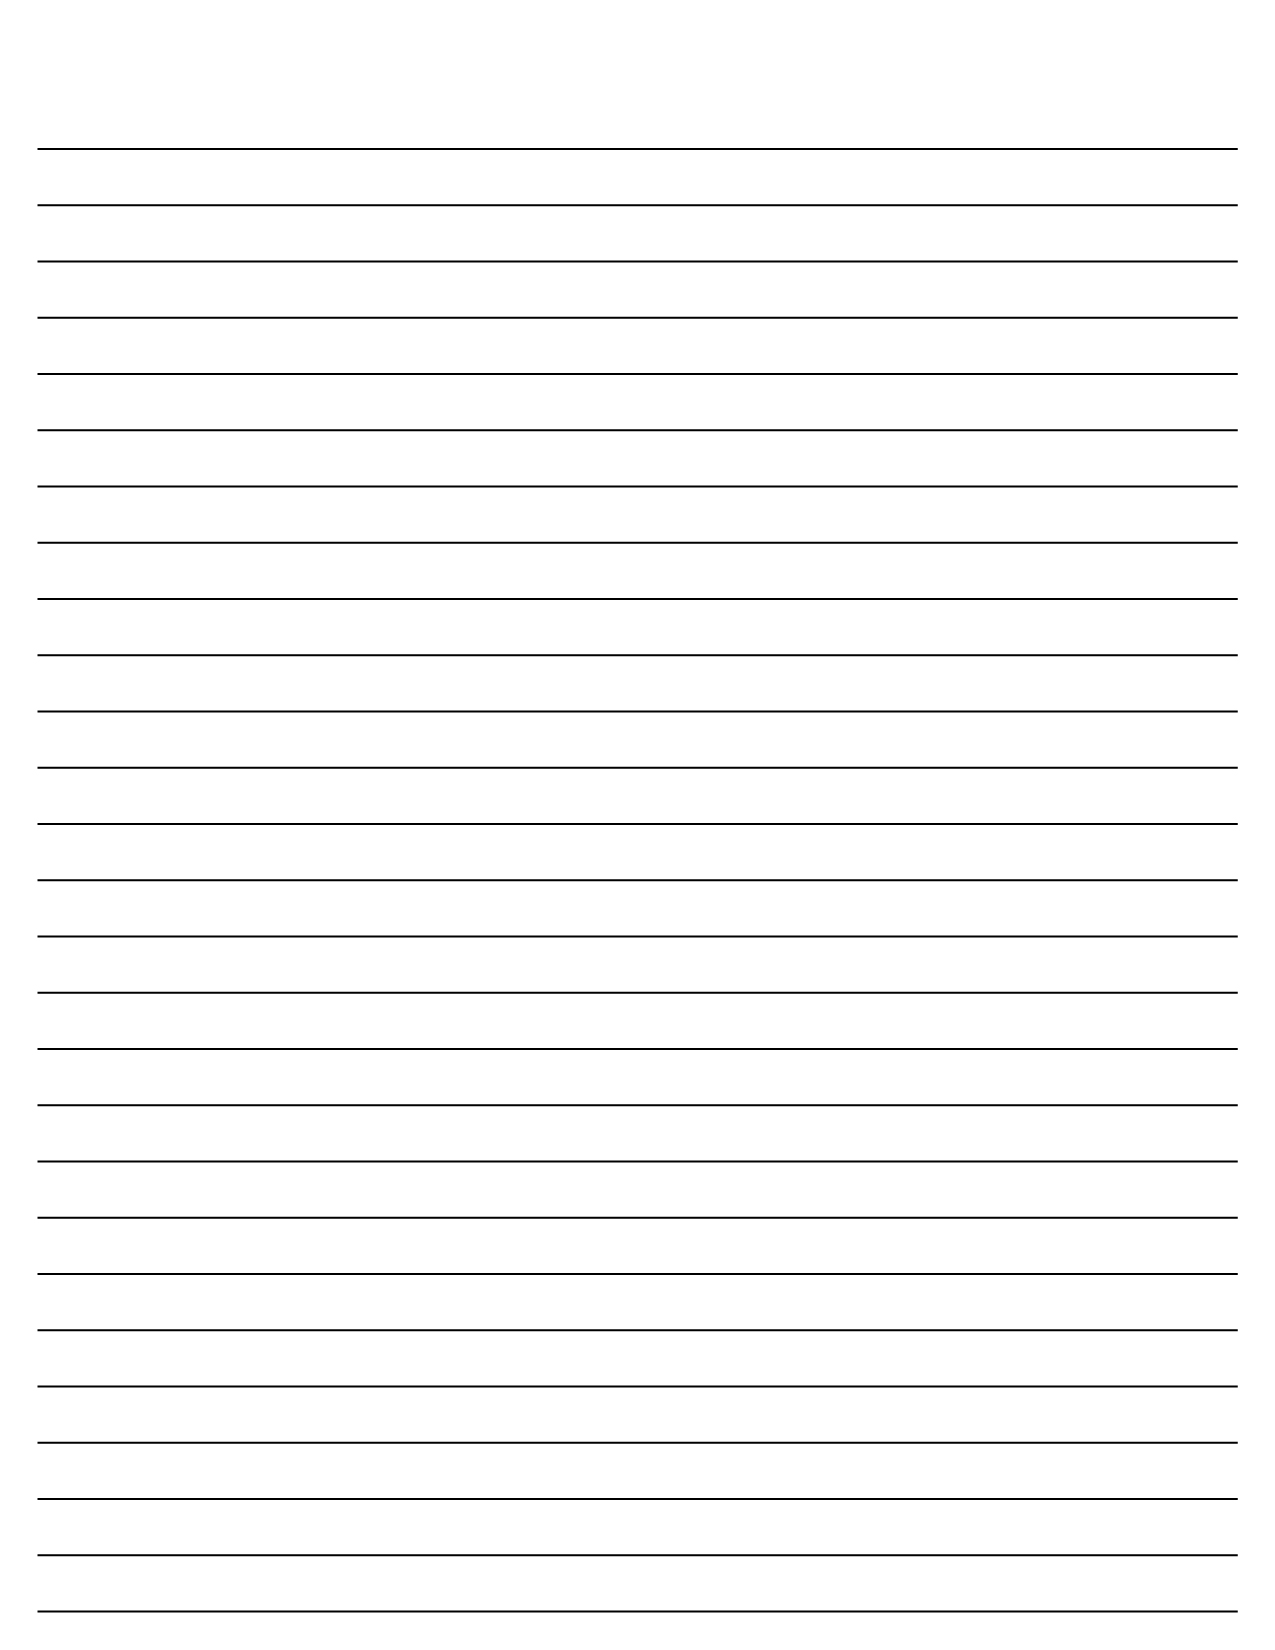 Lined Paper Print Free